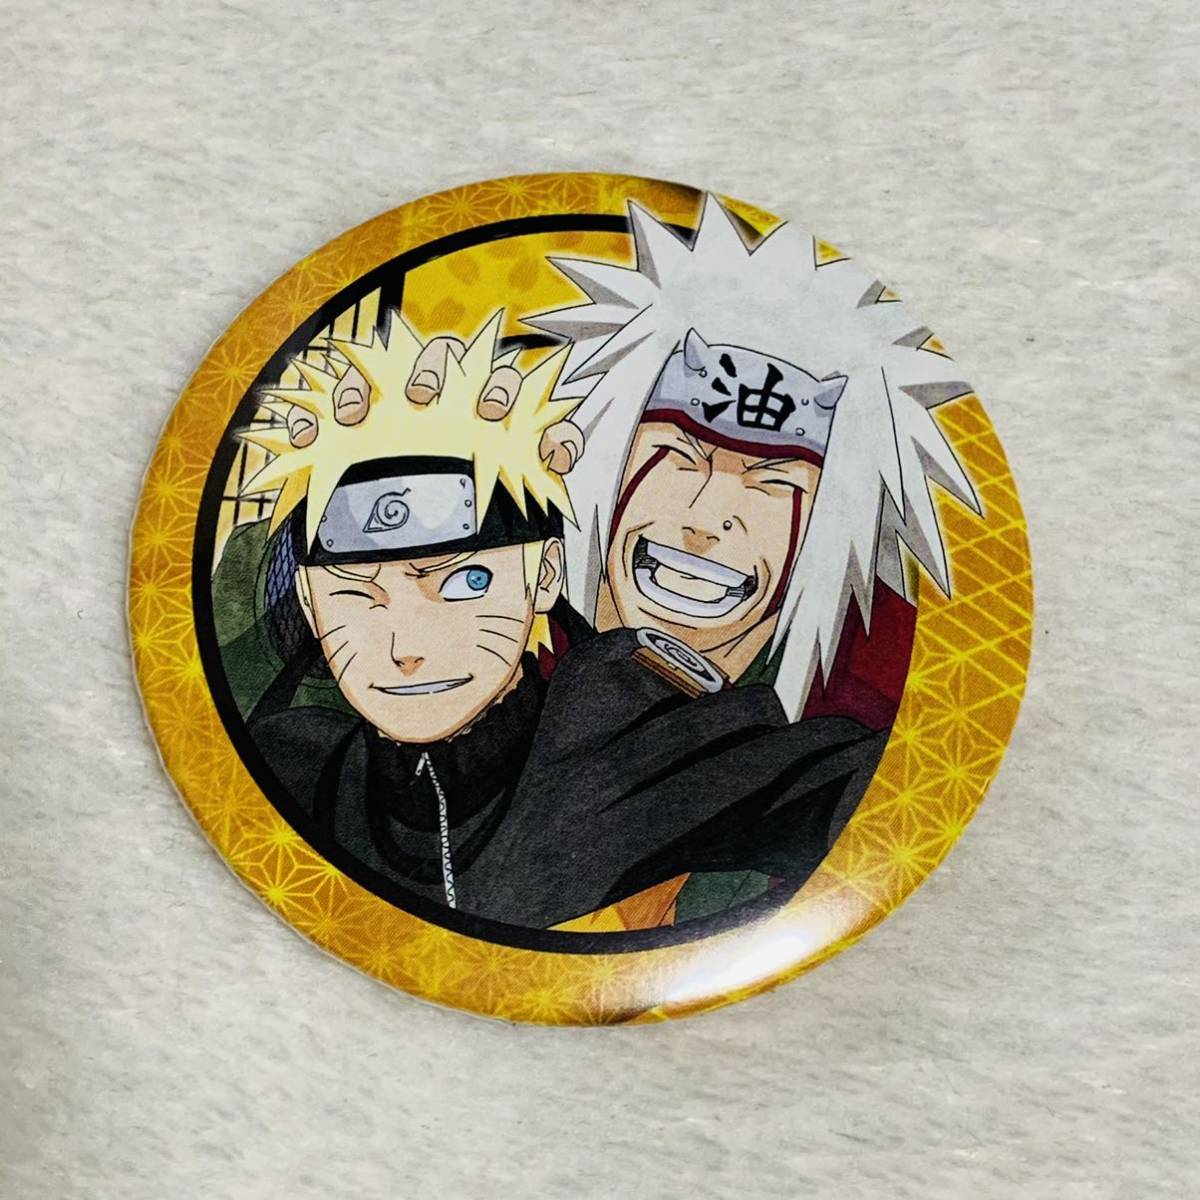 Naruto ナルト 疾風伝 Naruto展 原作 コレクション缶バッジ 缶バッジ うずまき ナルト 自来也 Product Details Yahoo Auctions Japan Proxy Bidding And Shopping Service From Japan